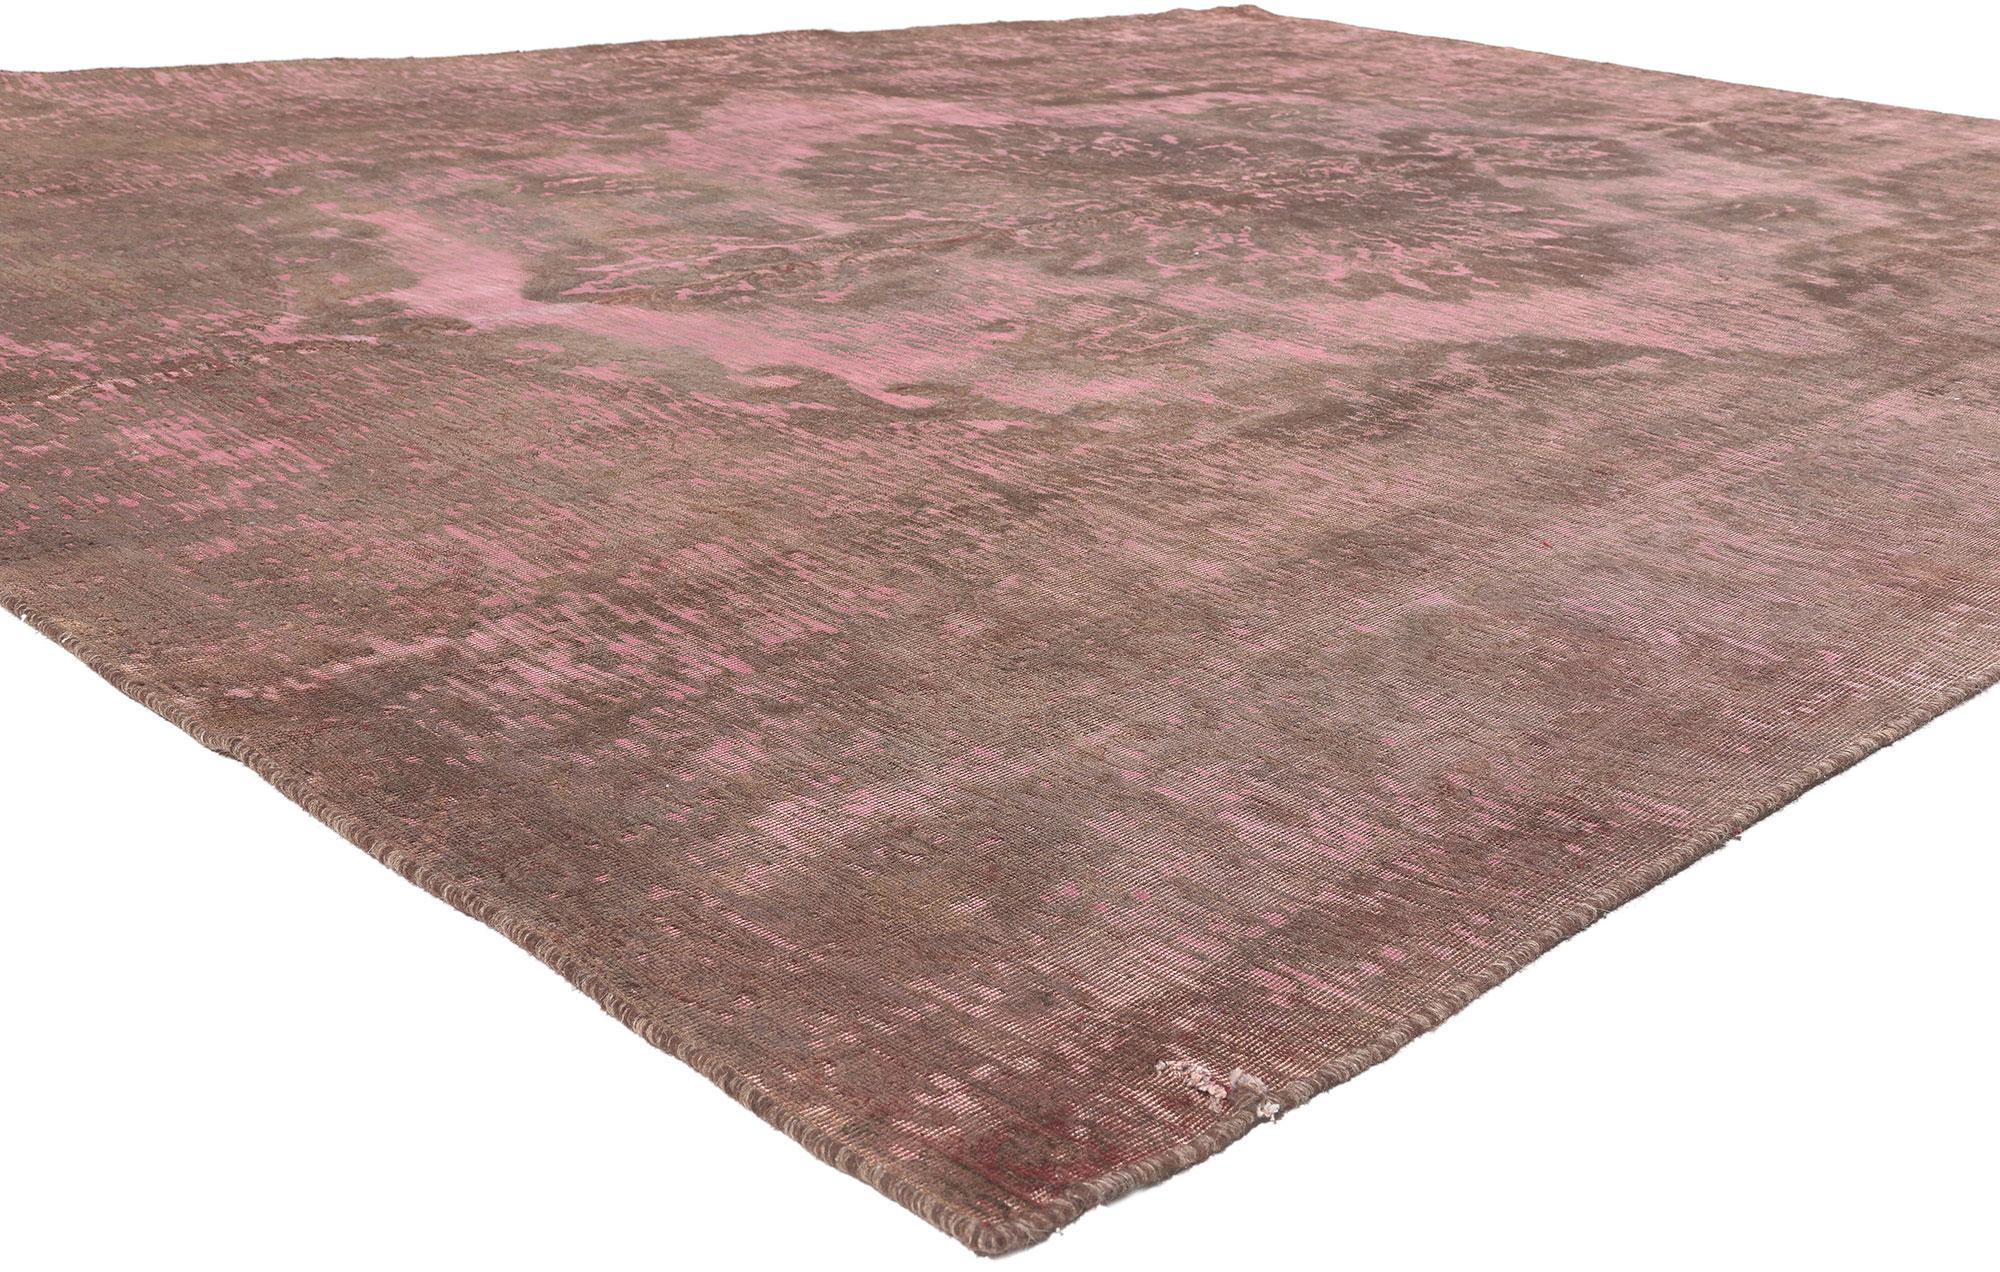 Boho Chic meets the softer side of Modern Industrial style in this hand knotted wool vintage Turkish overdyed rug. The decorative detailing and bohemian color palette in this piece deliver a sophisticated chic aesthetic with romantic connotations.